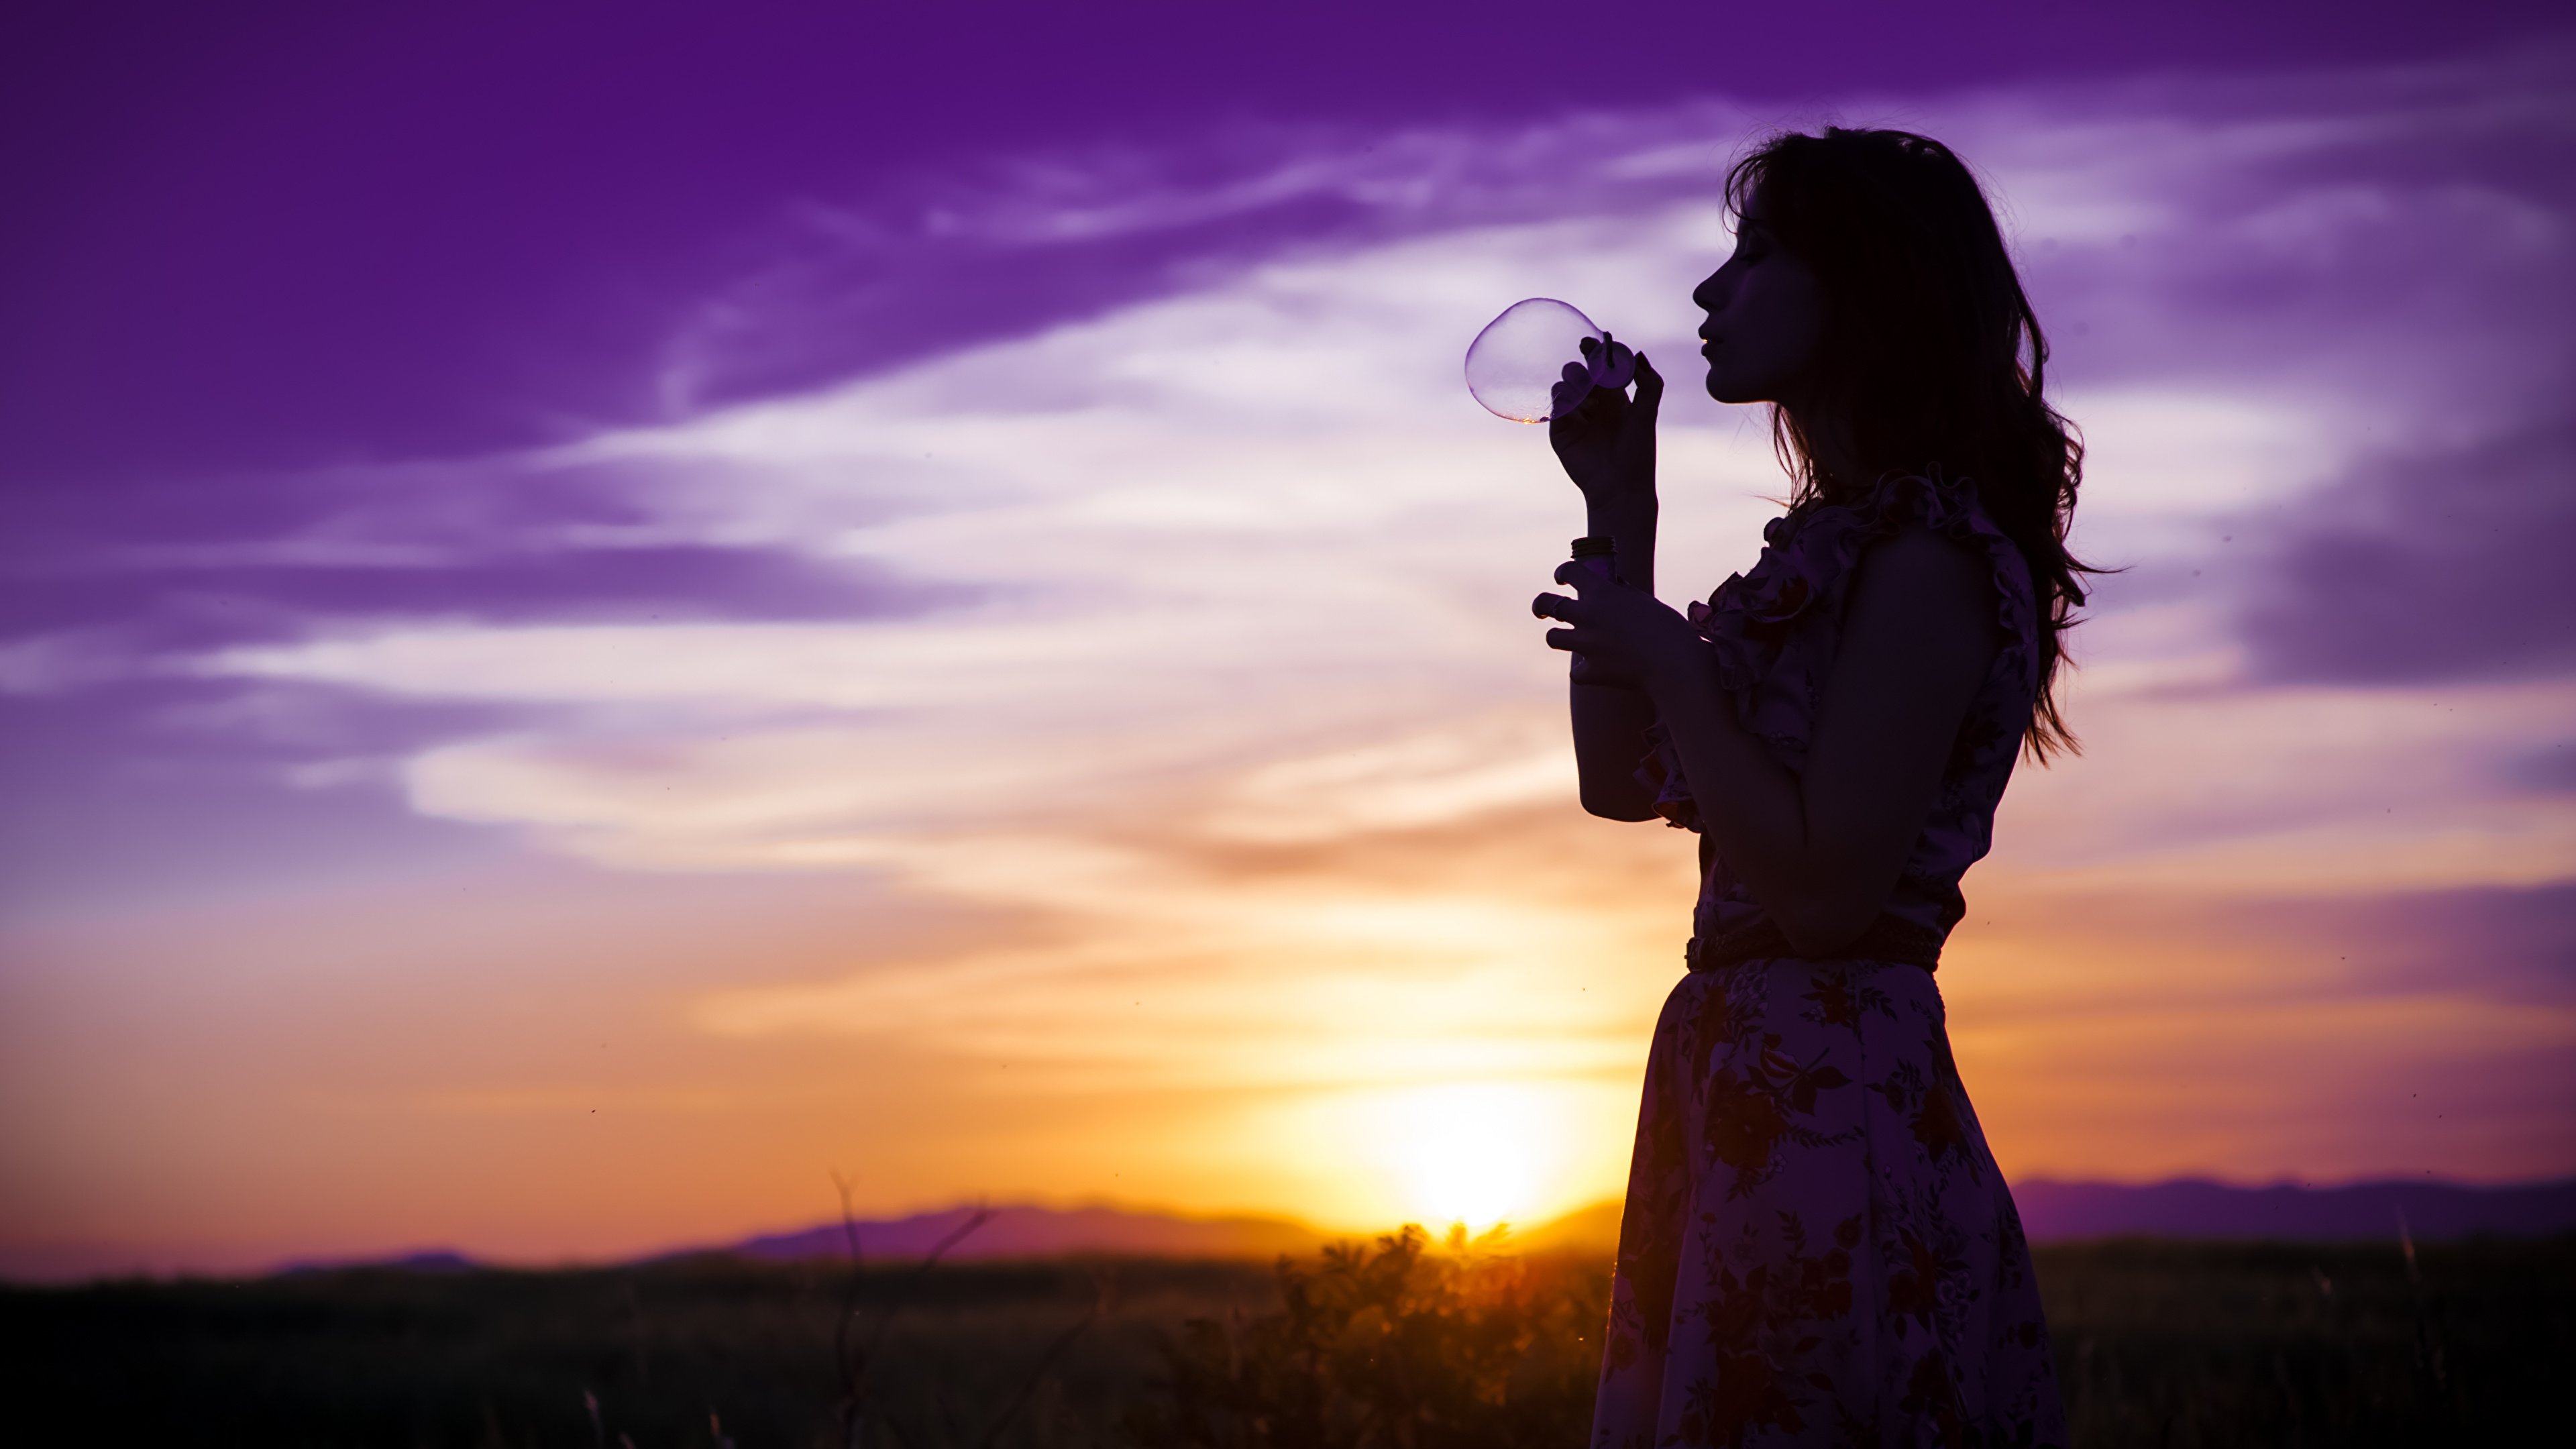 image young woman Sky sunrise and sunset 3840x2160